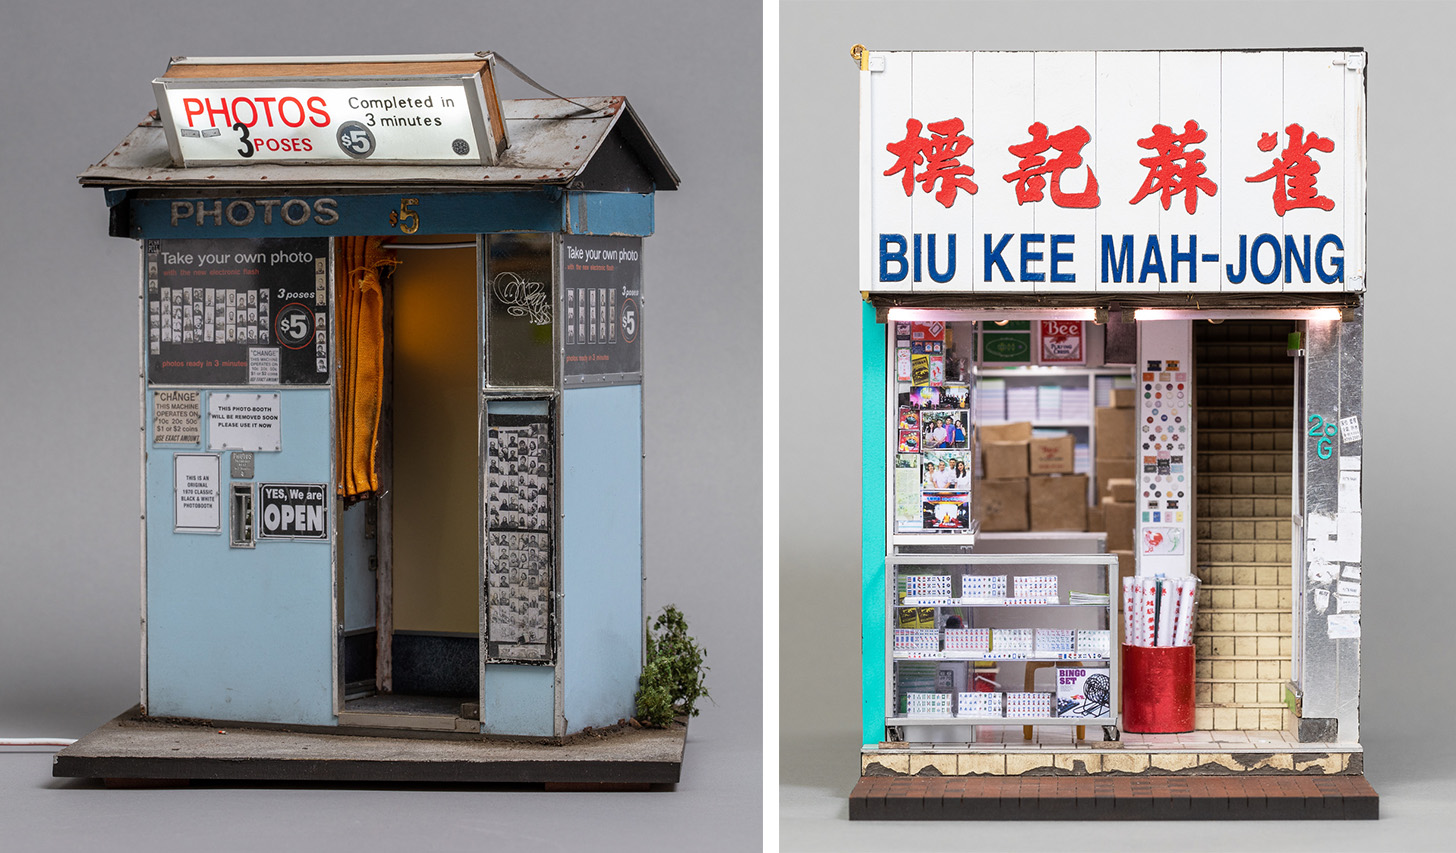 A side-by-side image of two miniature structures. The one on the left shows a photobooth, and the one of the right shows a Maj-jong shop.